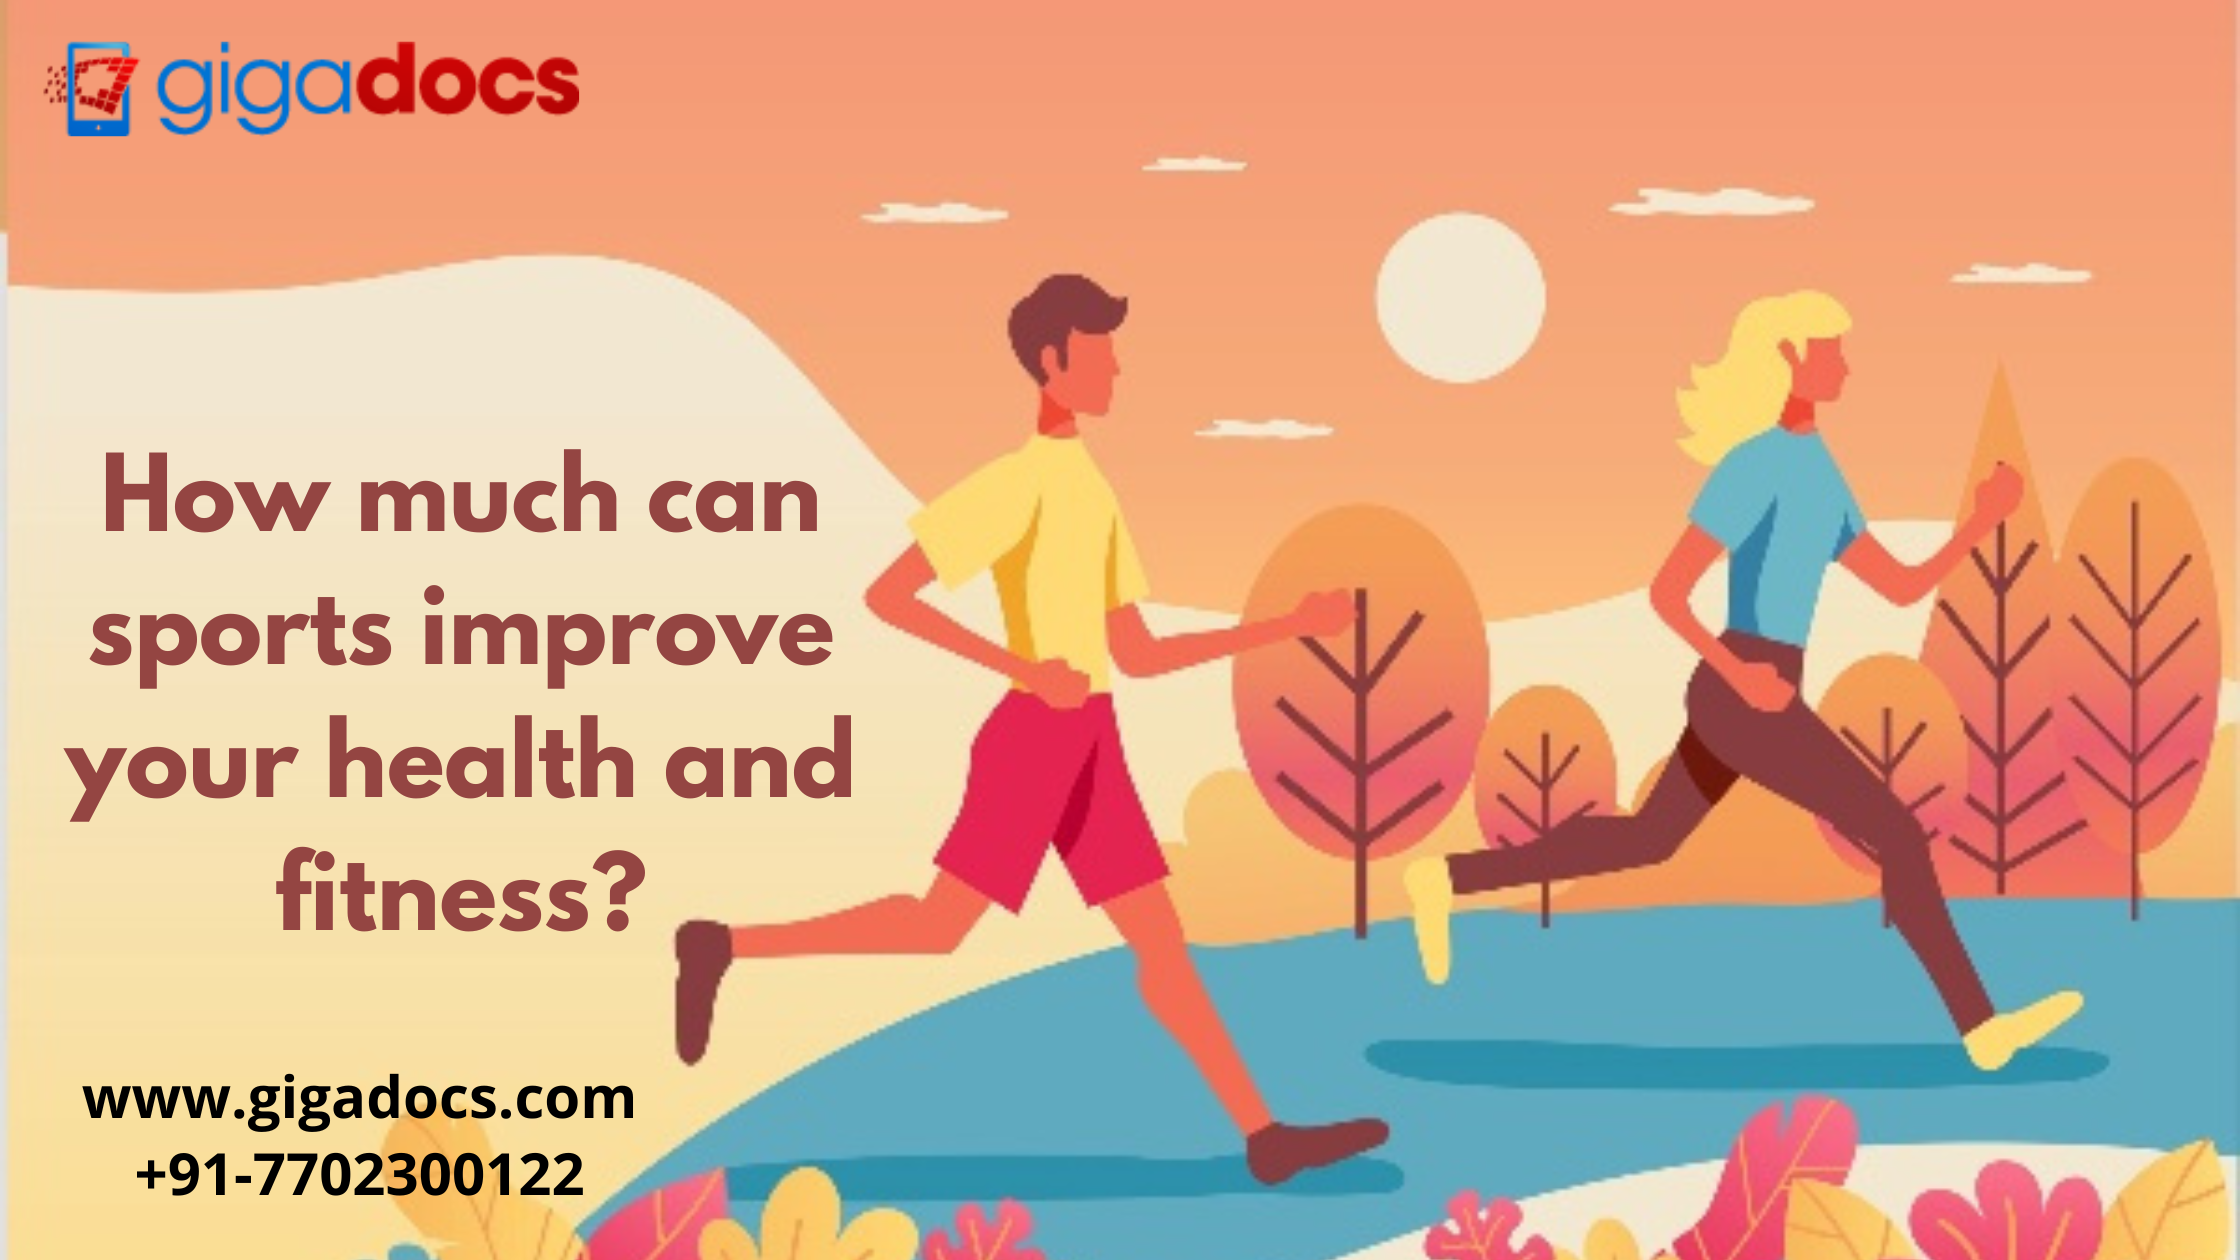 What are the Health and Fitness Benefits of Sport? - Gigadocs